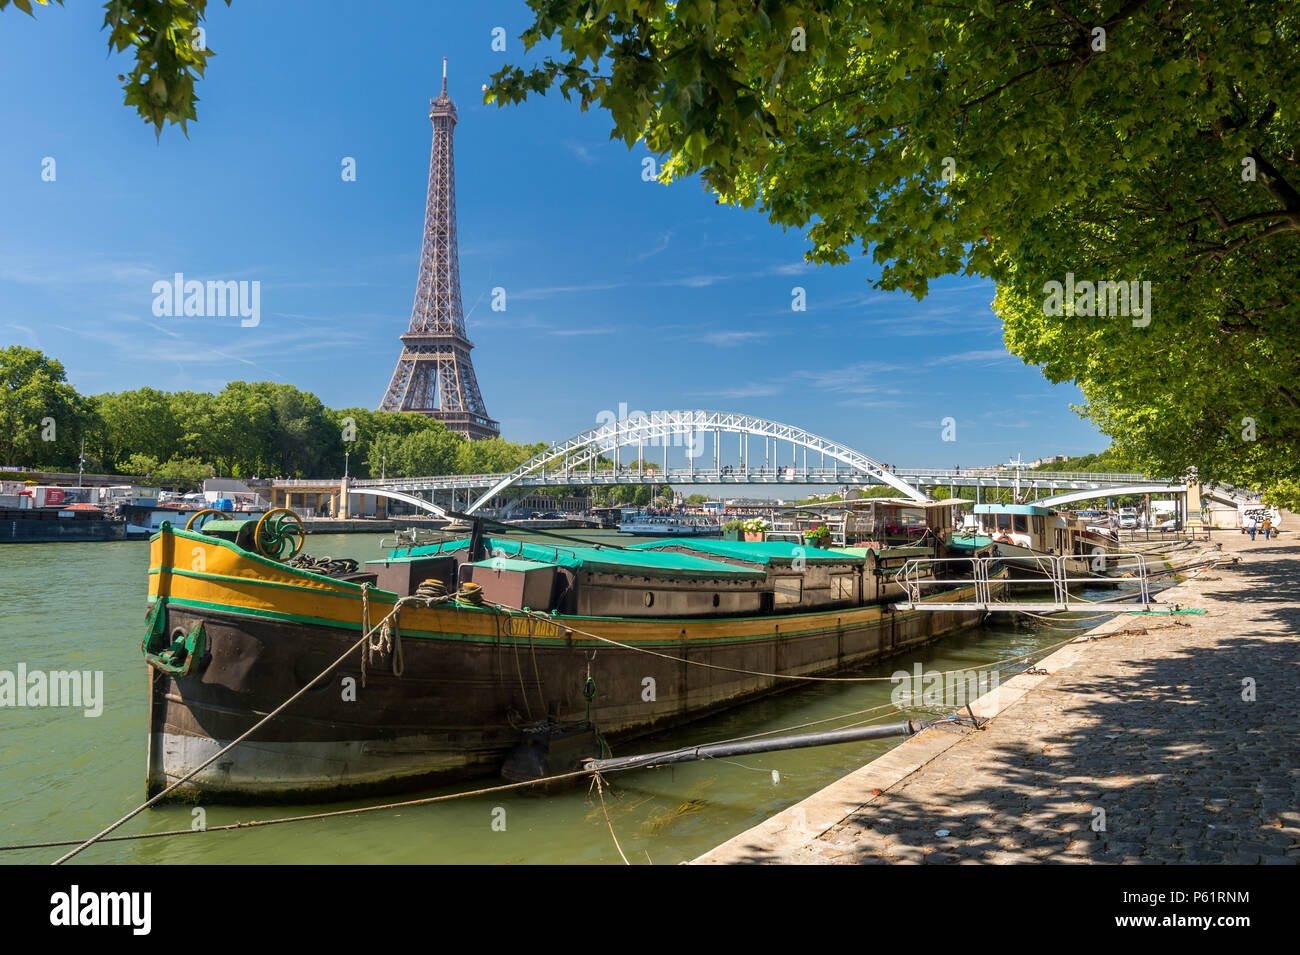 Paris, France - 23 June 2018: Residential barge on the Seine River with Eiffel Tower in background Stock Photo